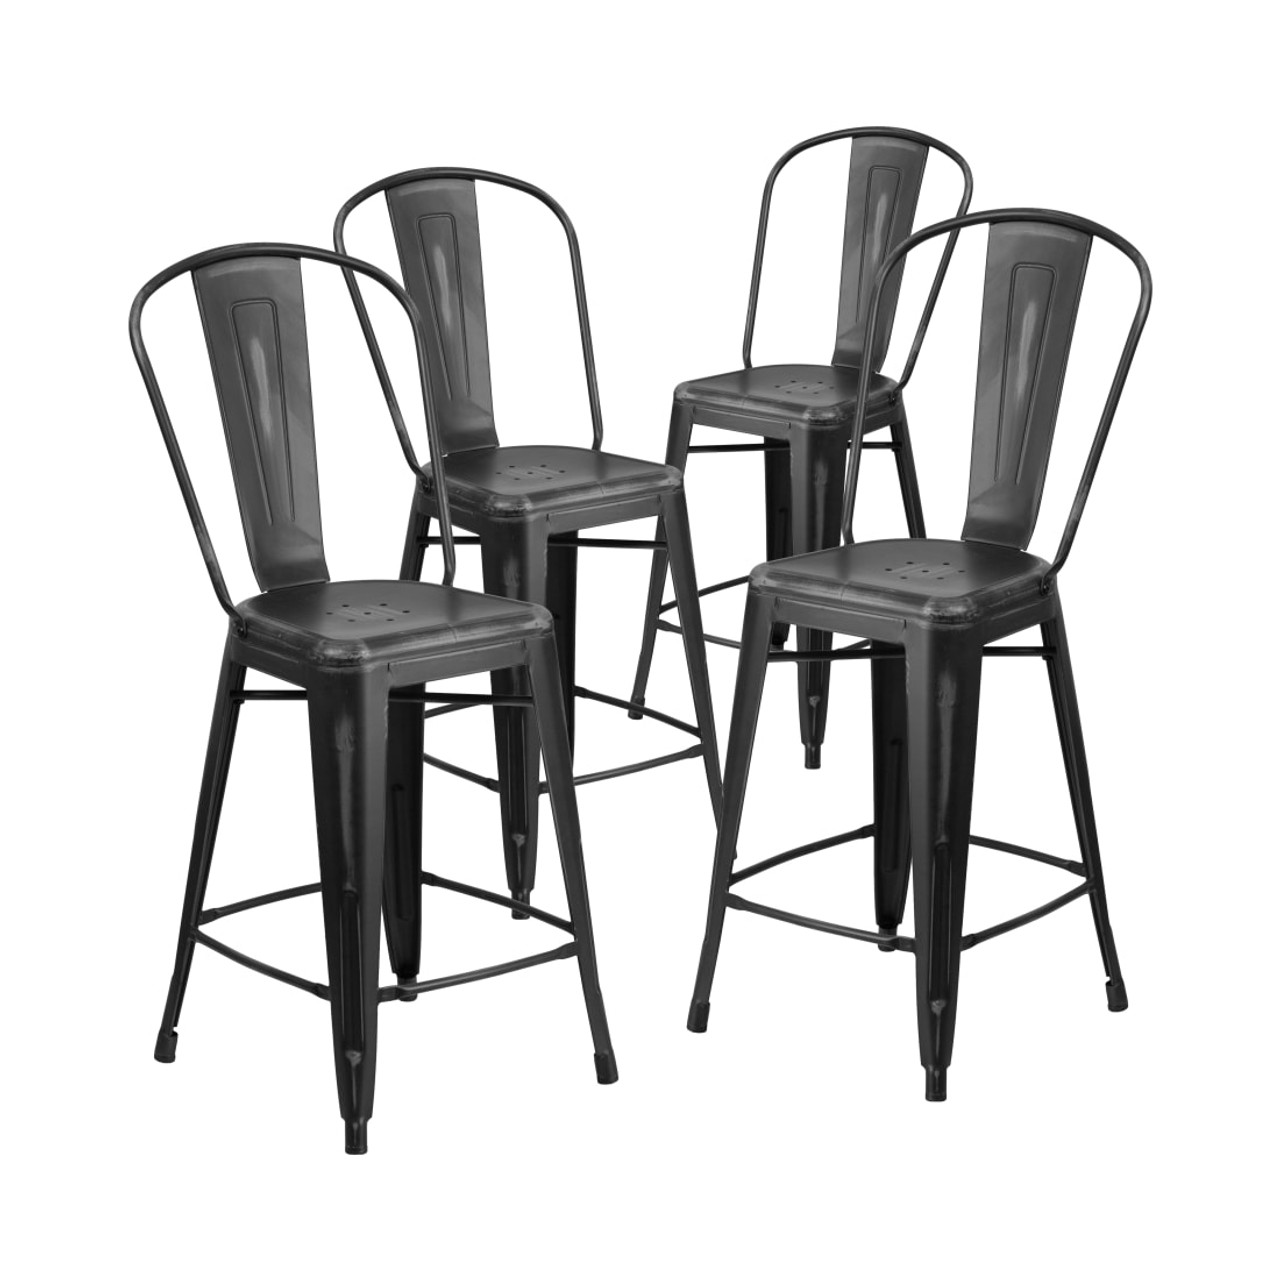 4 Pack 24” High Distressed Black Metal Indoor-Outdoor Counter Height Stool with Back